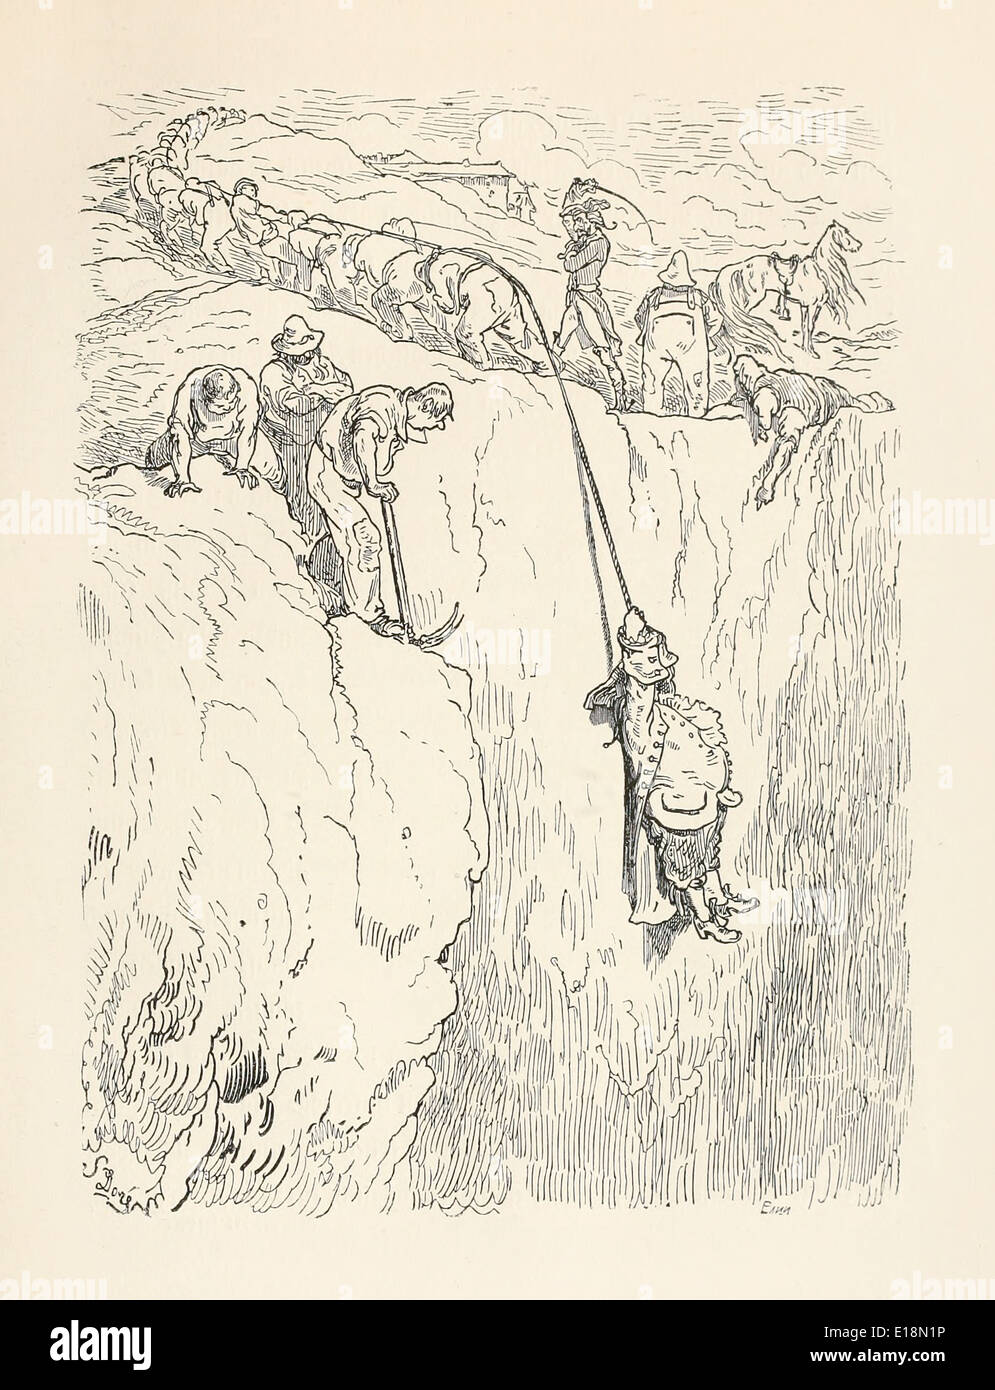 Chapter 3 Rescuing the servant from the pit. Paul Gustave Doré (1832-1883) illustration from ‘The Adventures of Baron Munchausen’ by Rudoph Raspe published in 1862. Stock Photo